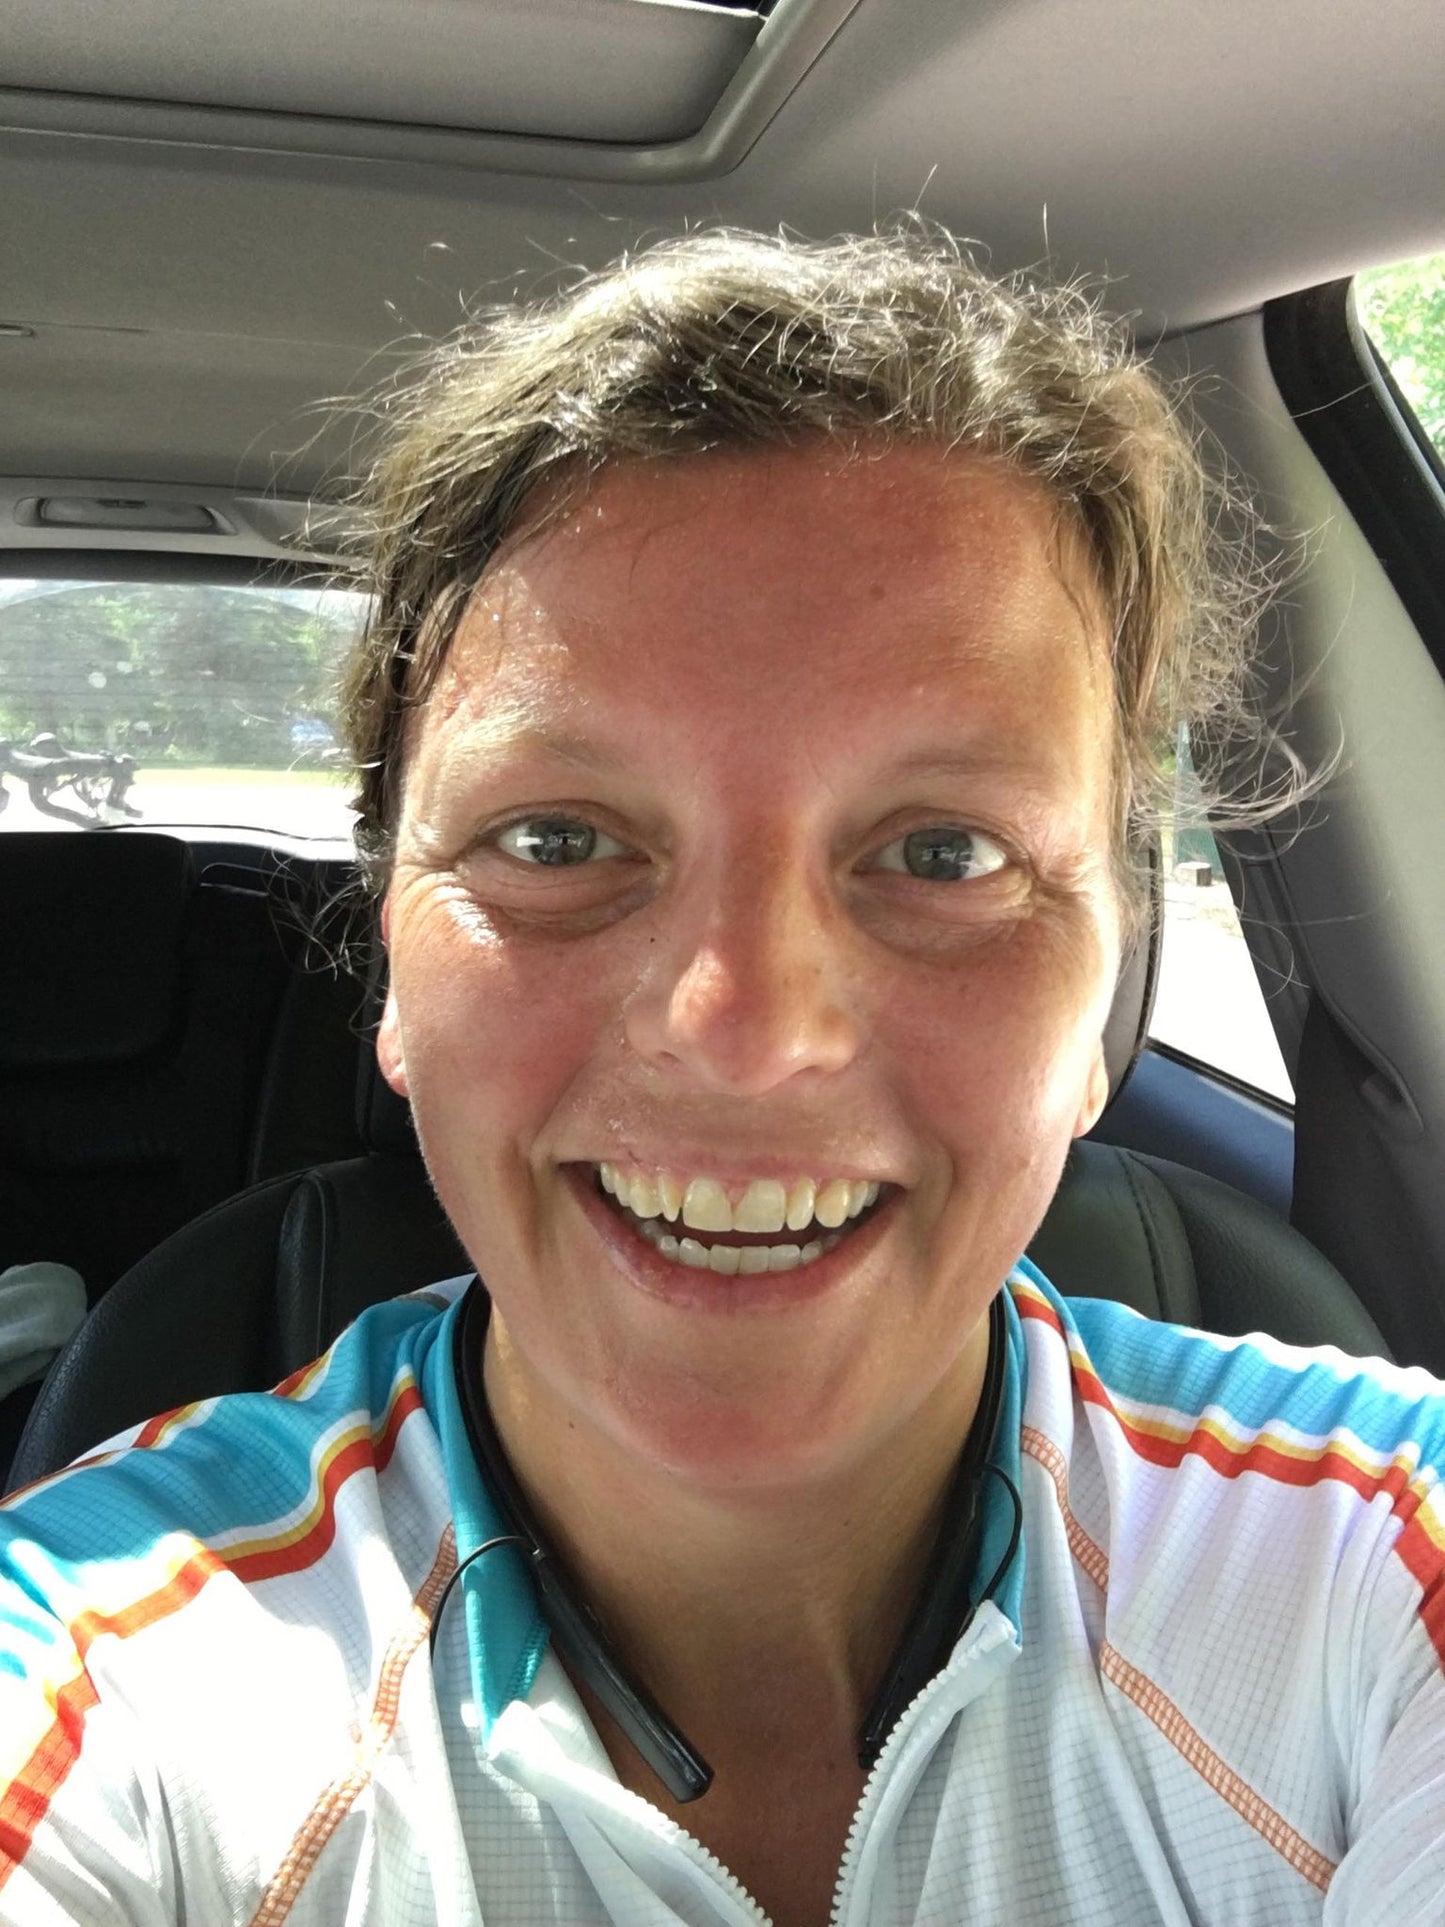 I healed chronic digestion issues, lost 40 pounds, and became a long distance cyclist (at 45!)